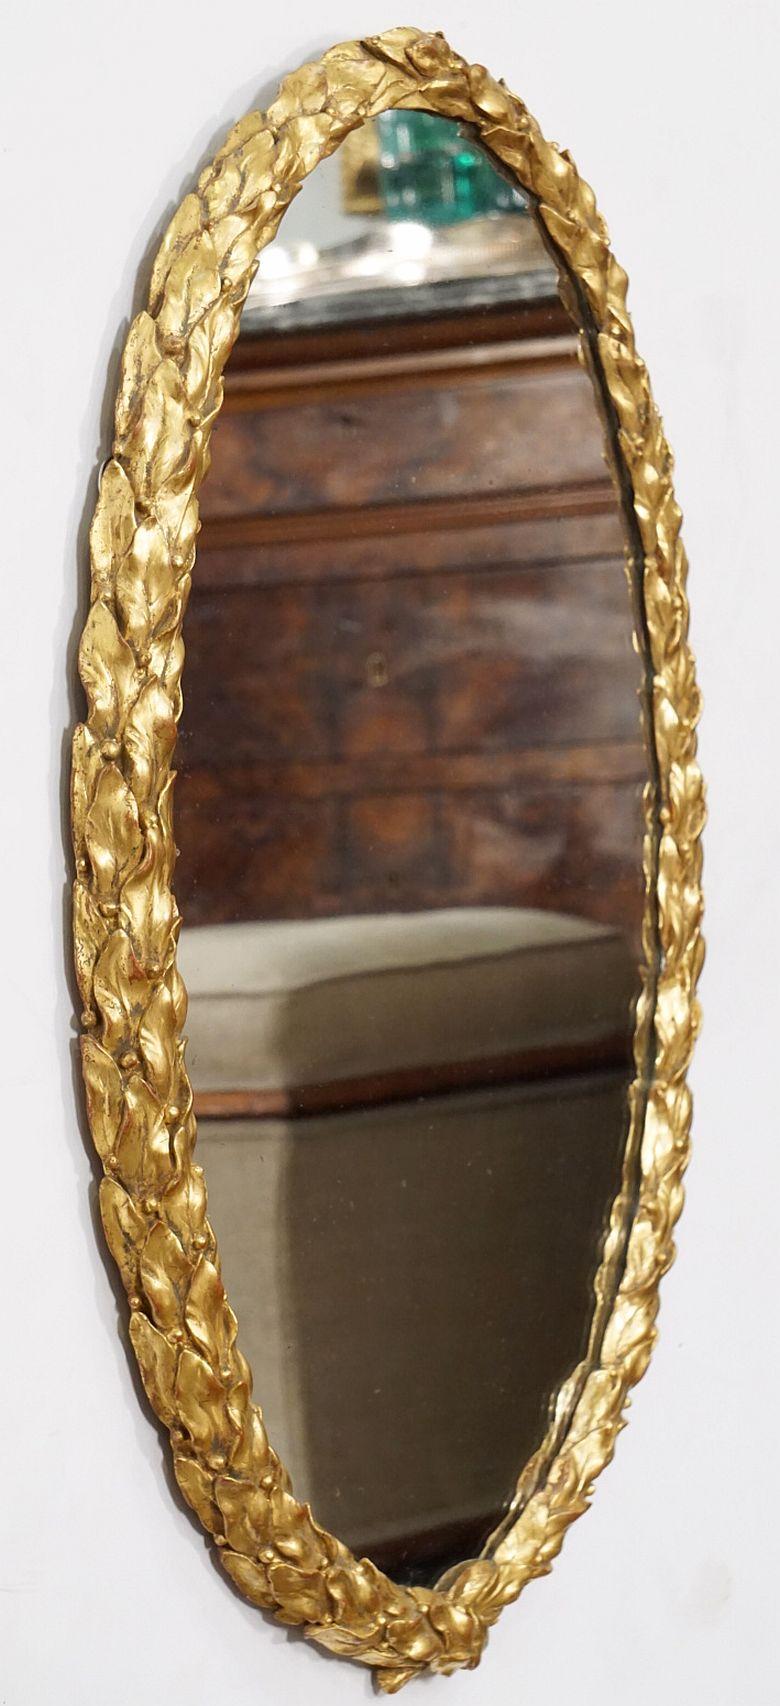 A fine English oval hall or wall mirror from the Regency Era, circa 1810, featuring a beautiful carved giltwood frame with a Neo-Classical foliate wreath design of laurel leaves.